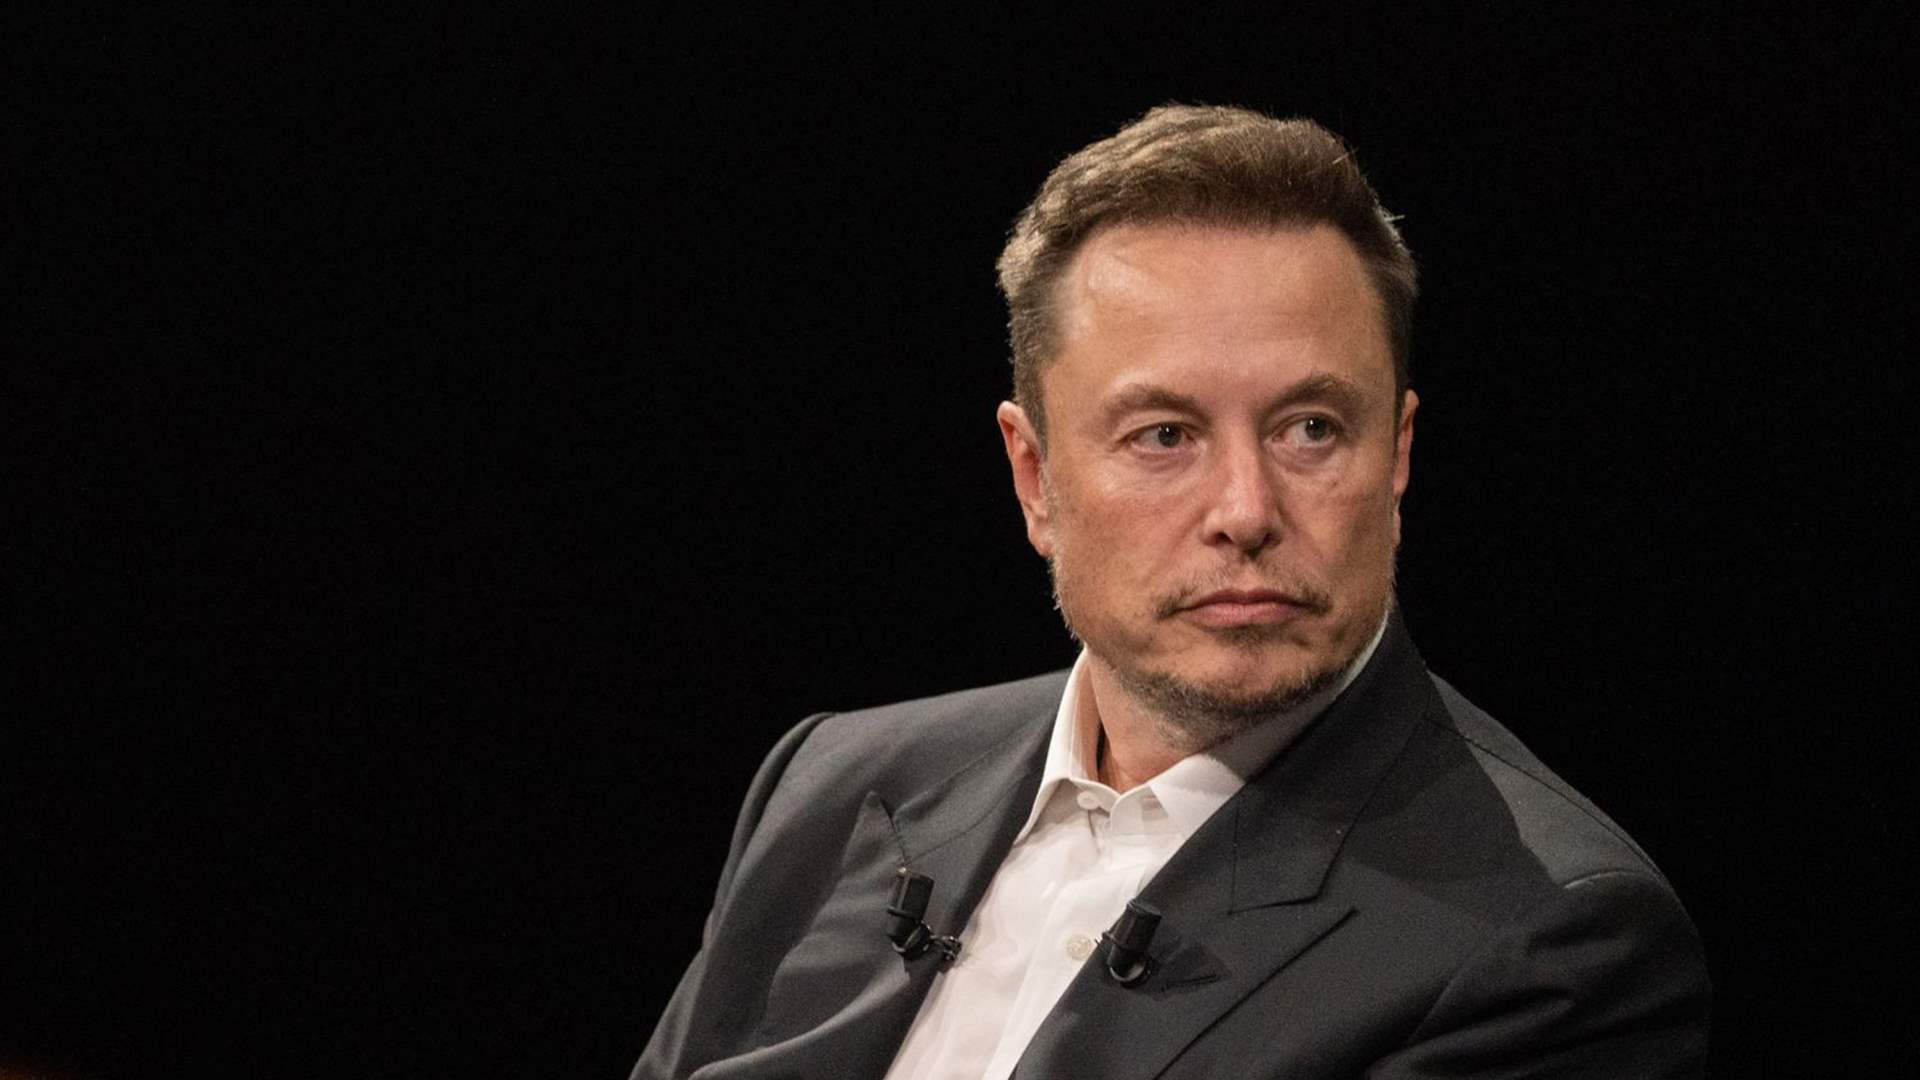 Elon Musk to attend Netanyahu address as guest of Israeli leader: Bloomberg News reports